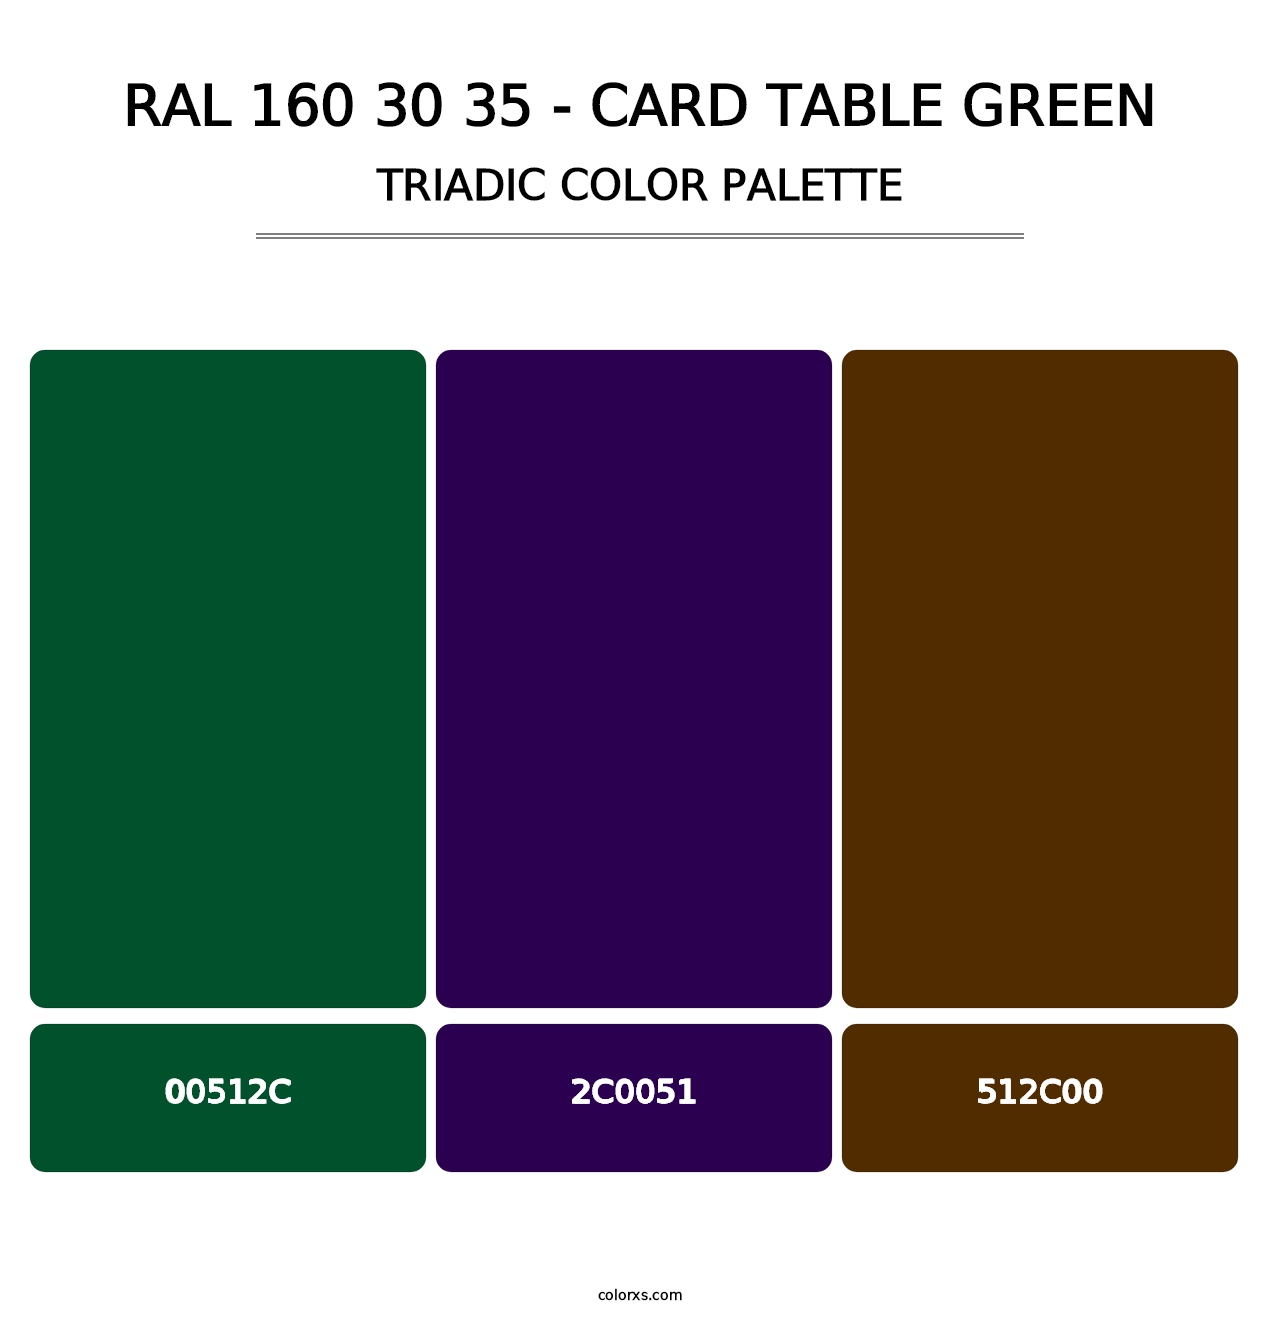 RAL 160 30 35 - Card Table Green - Triadic Color Palette